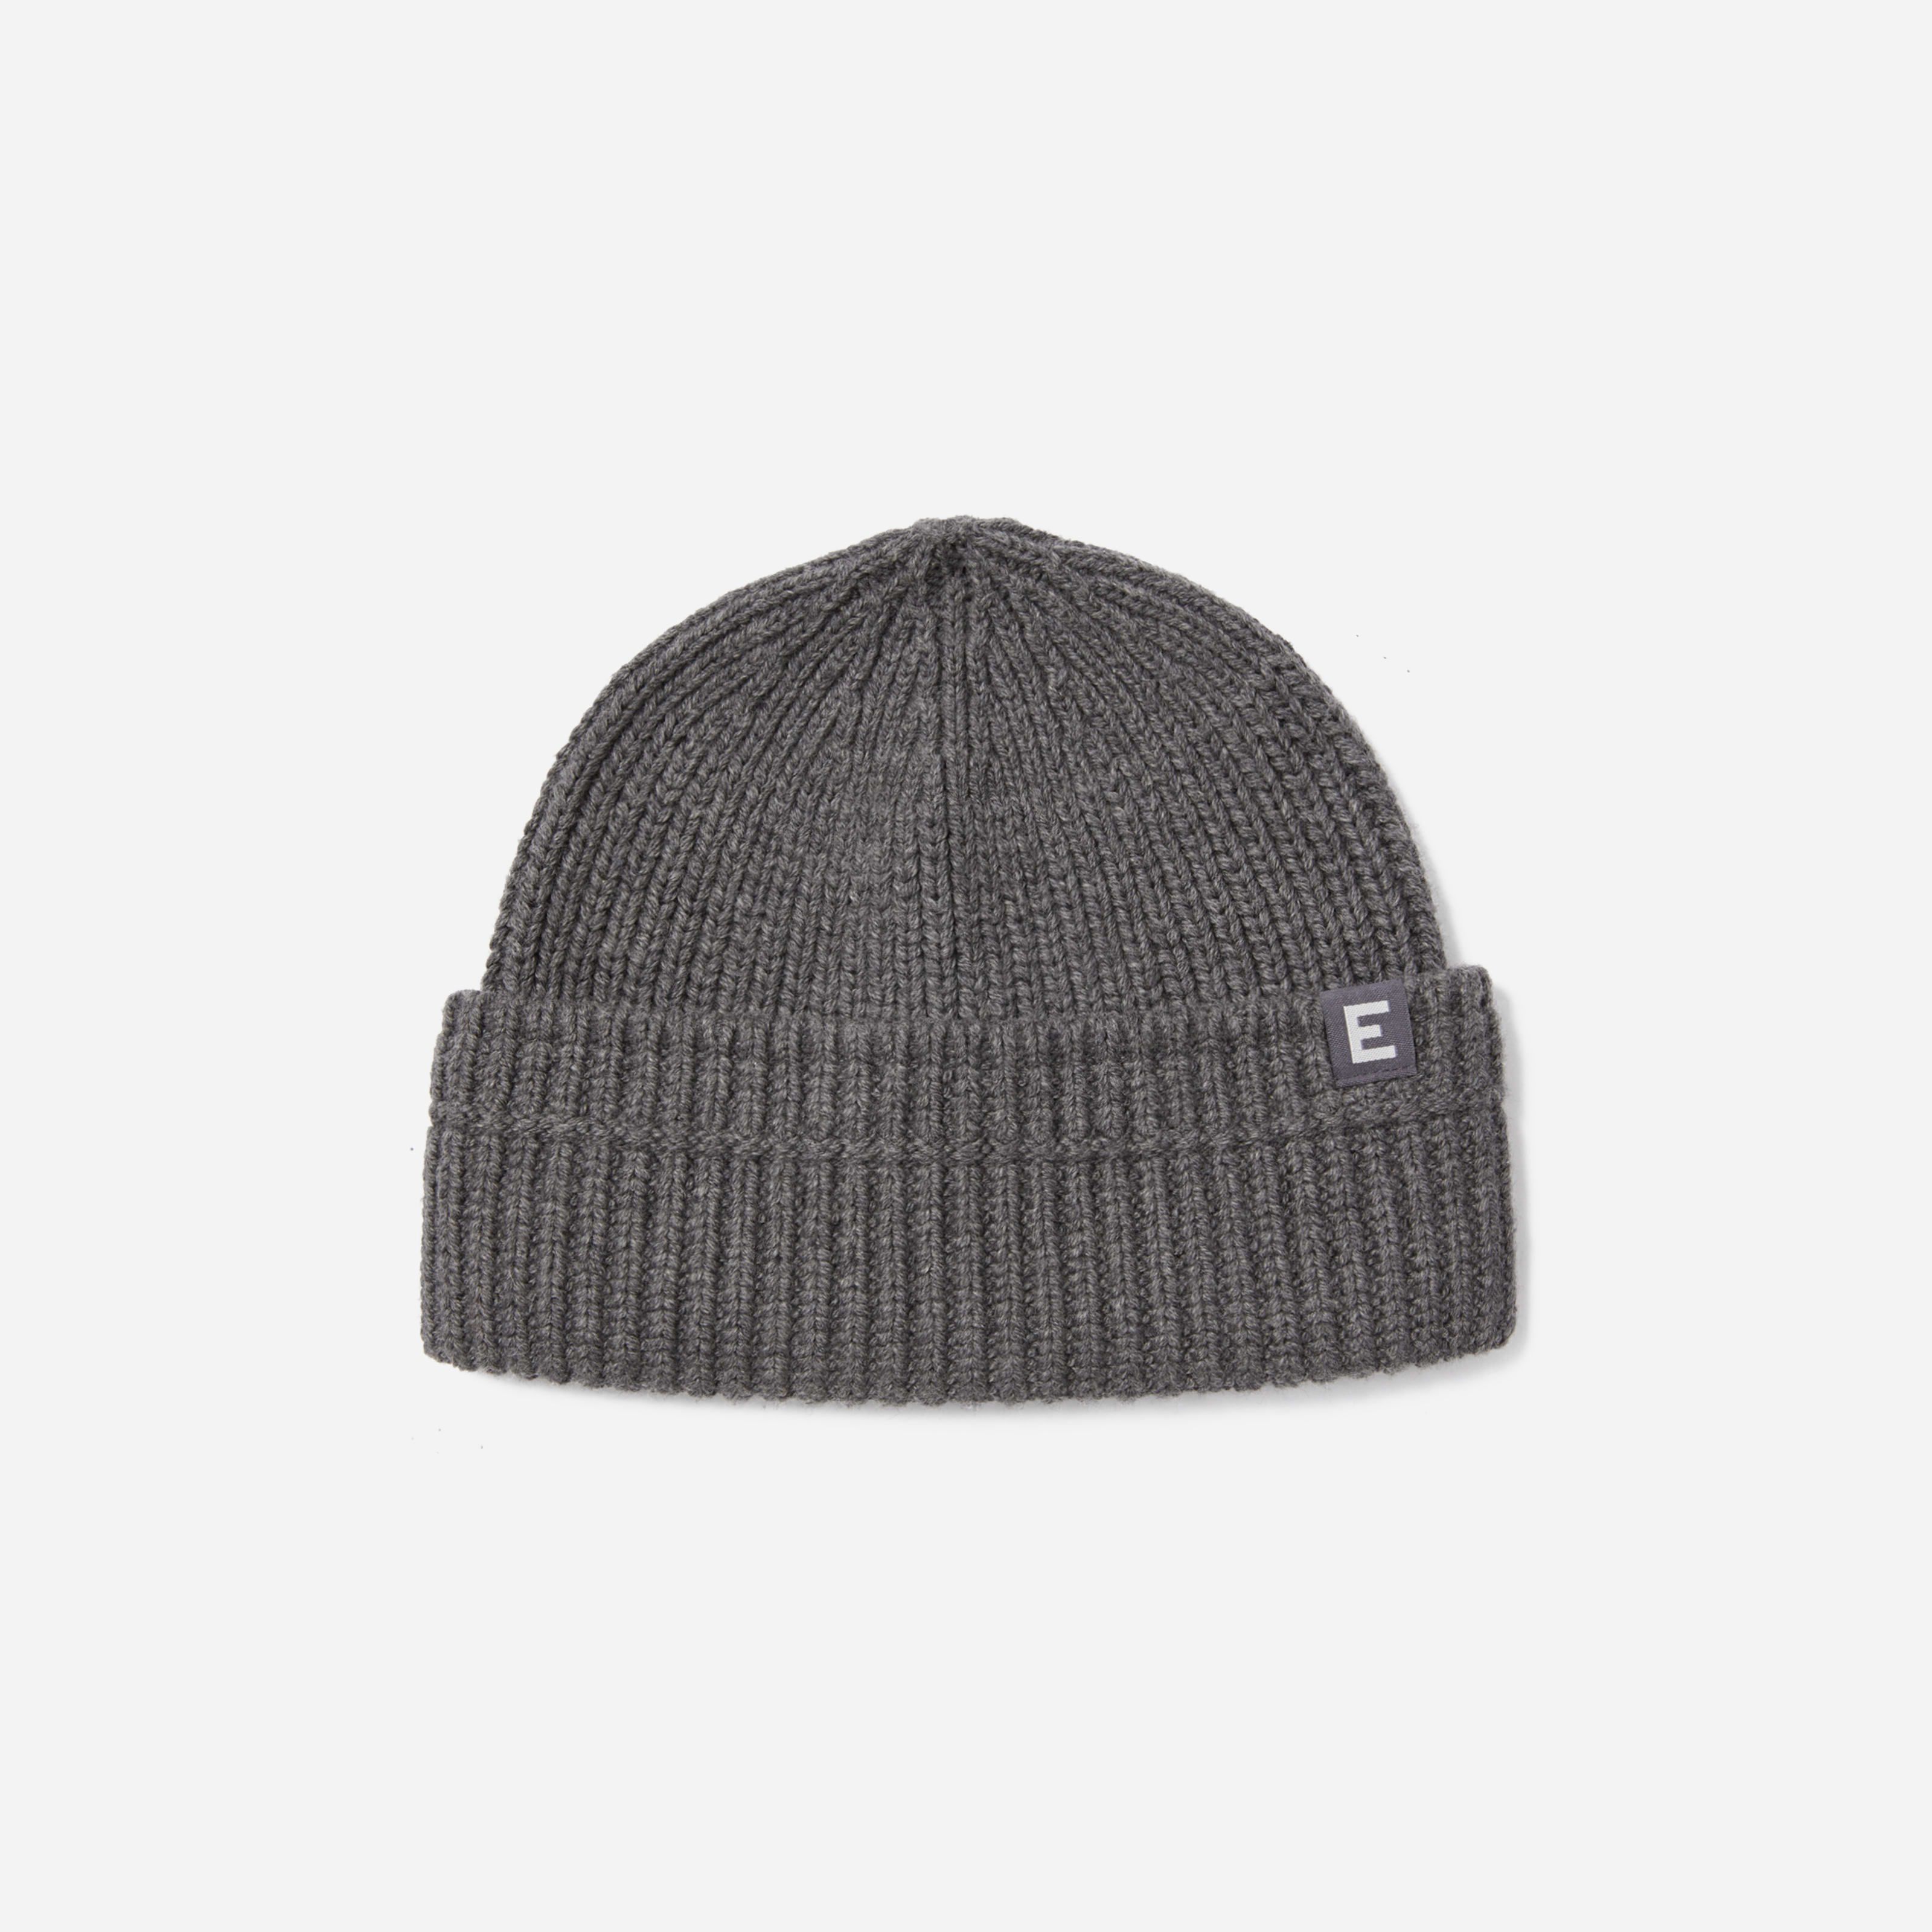 Men's Organic Cotton Chunky Beanie by Everlane in Heathered Charcoal | Everlane